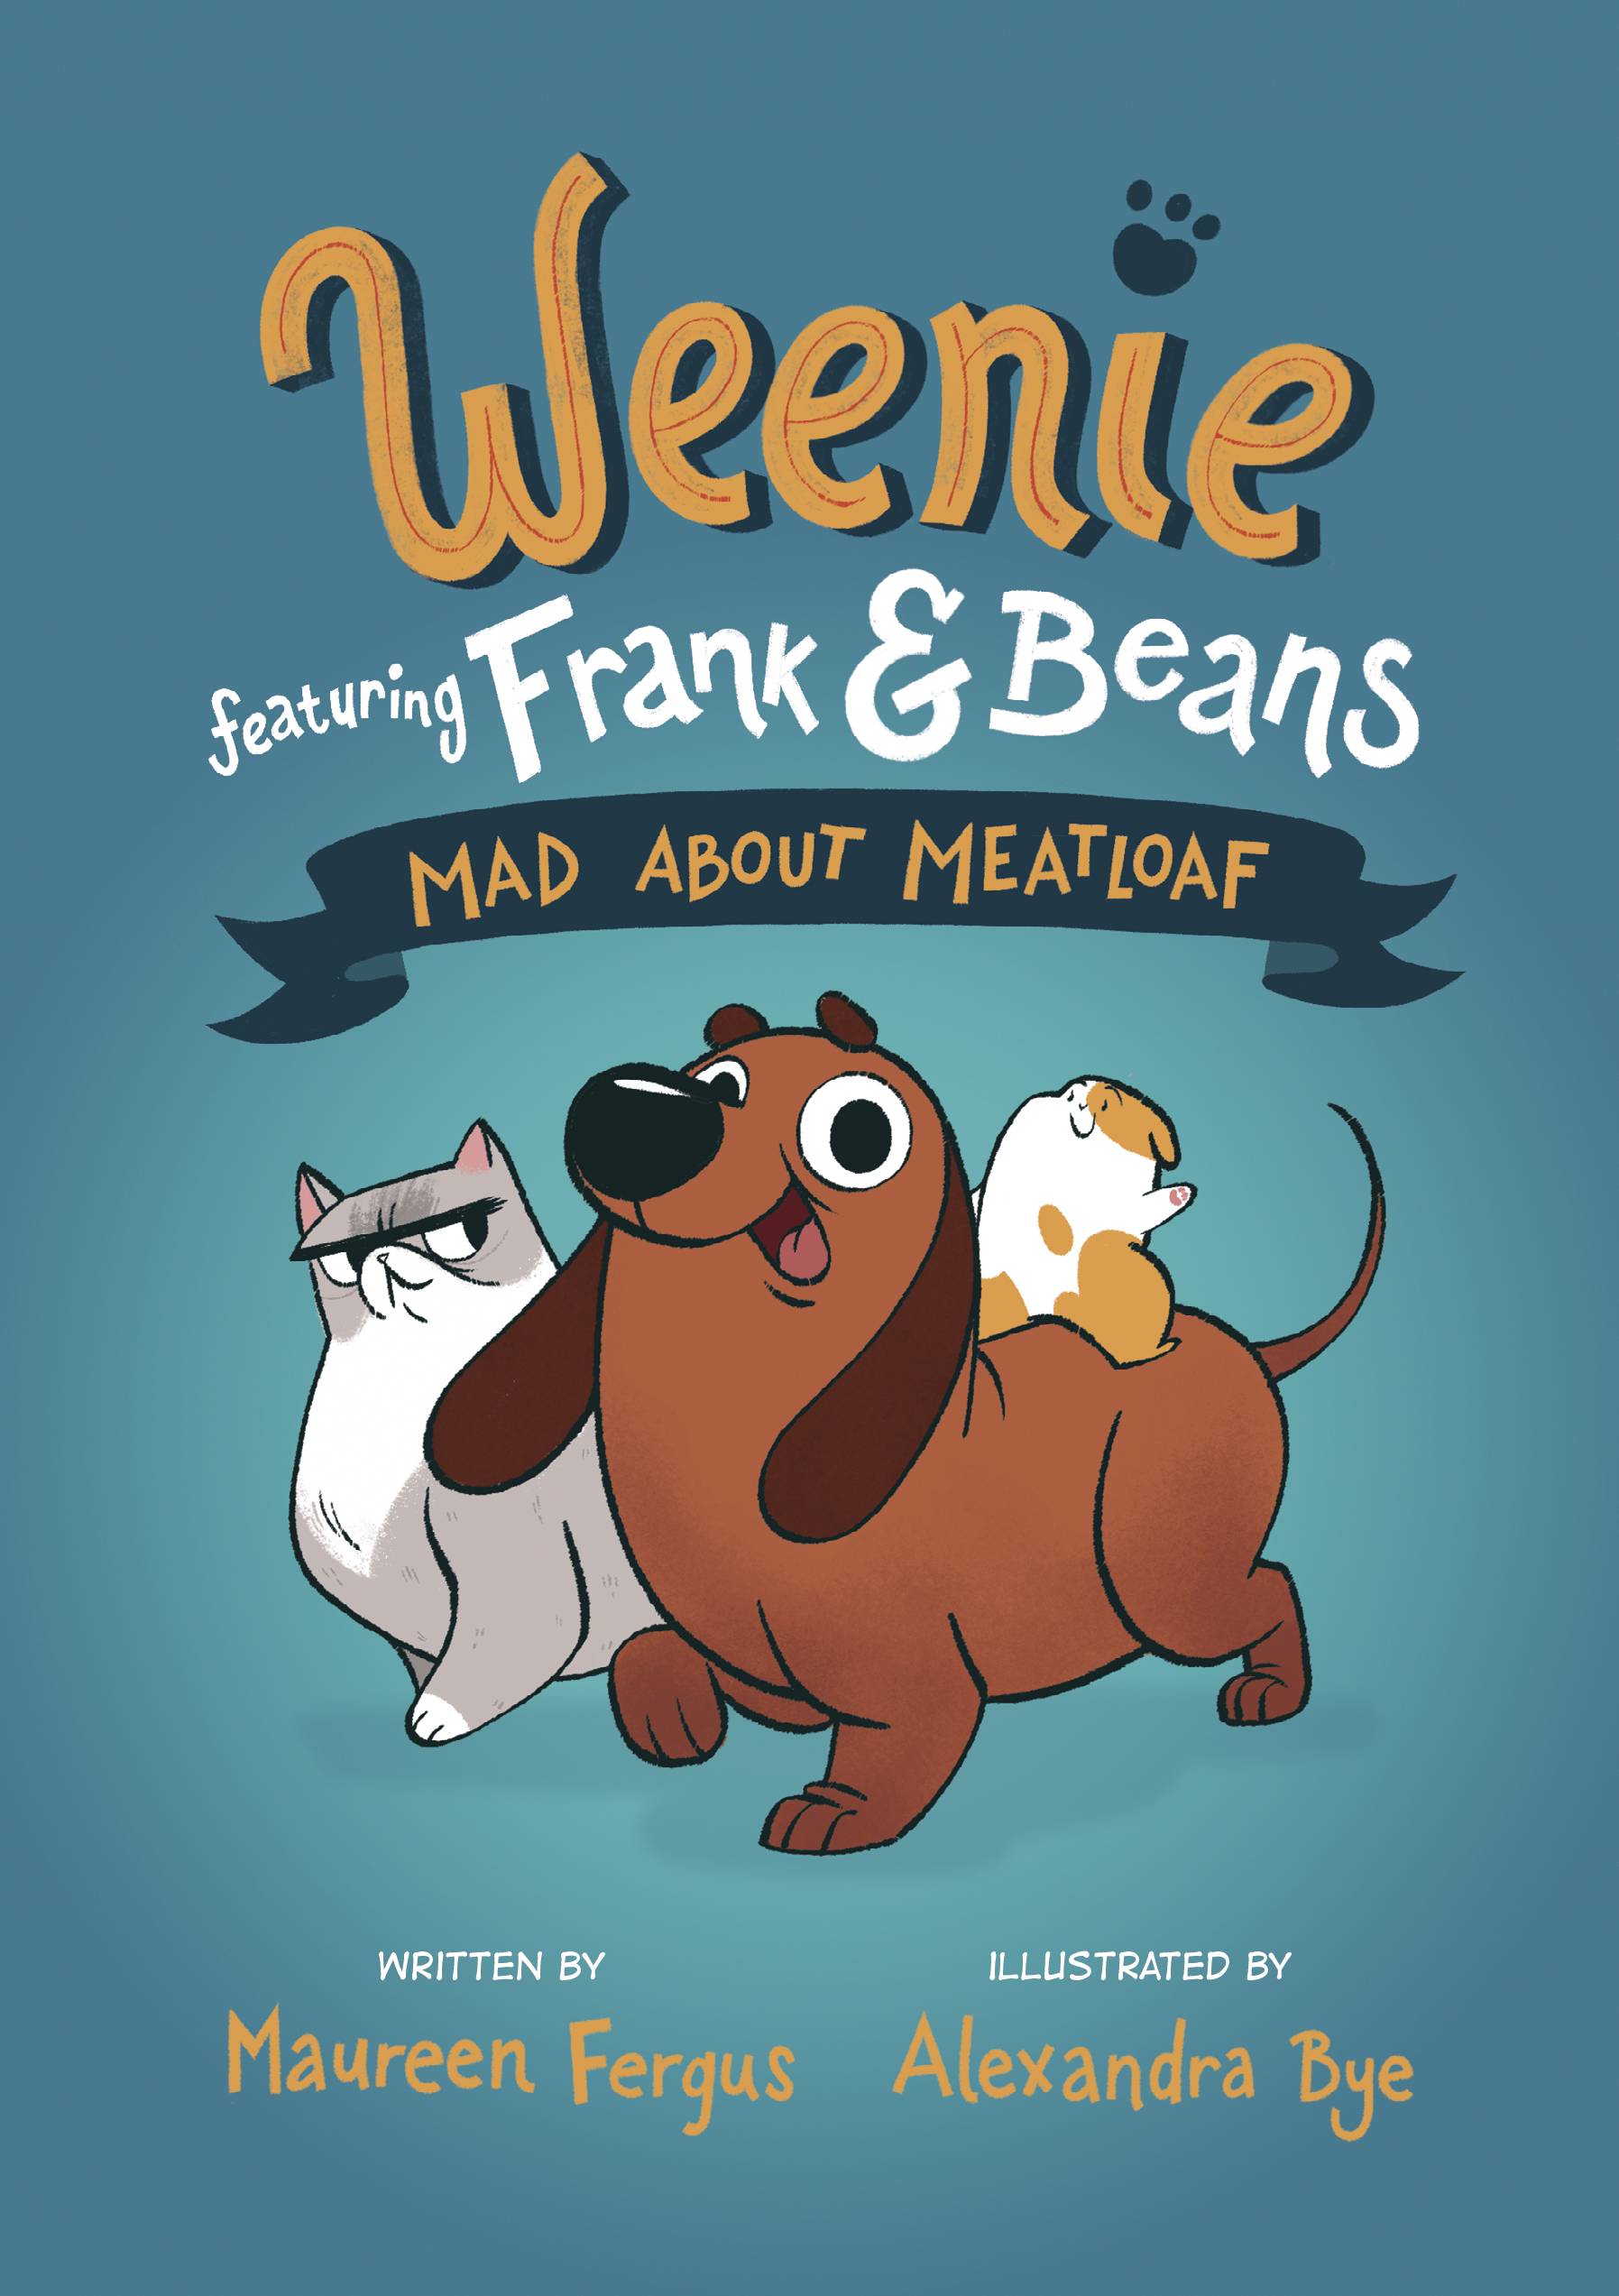 WEENIE FEATURING FRANK & BEANS GN VOL 01 MAD ABOUT MEATLOAF